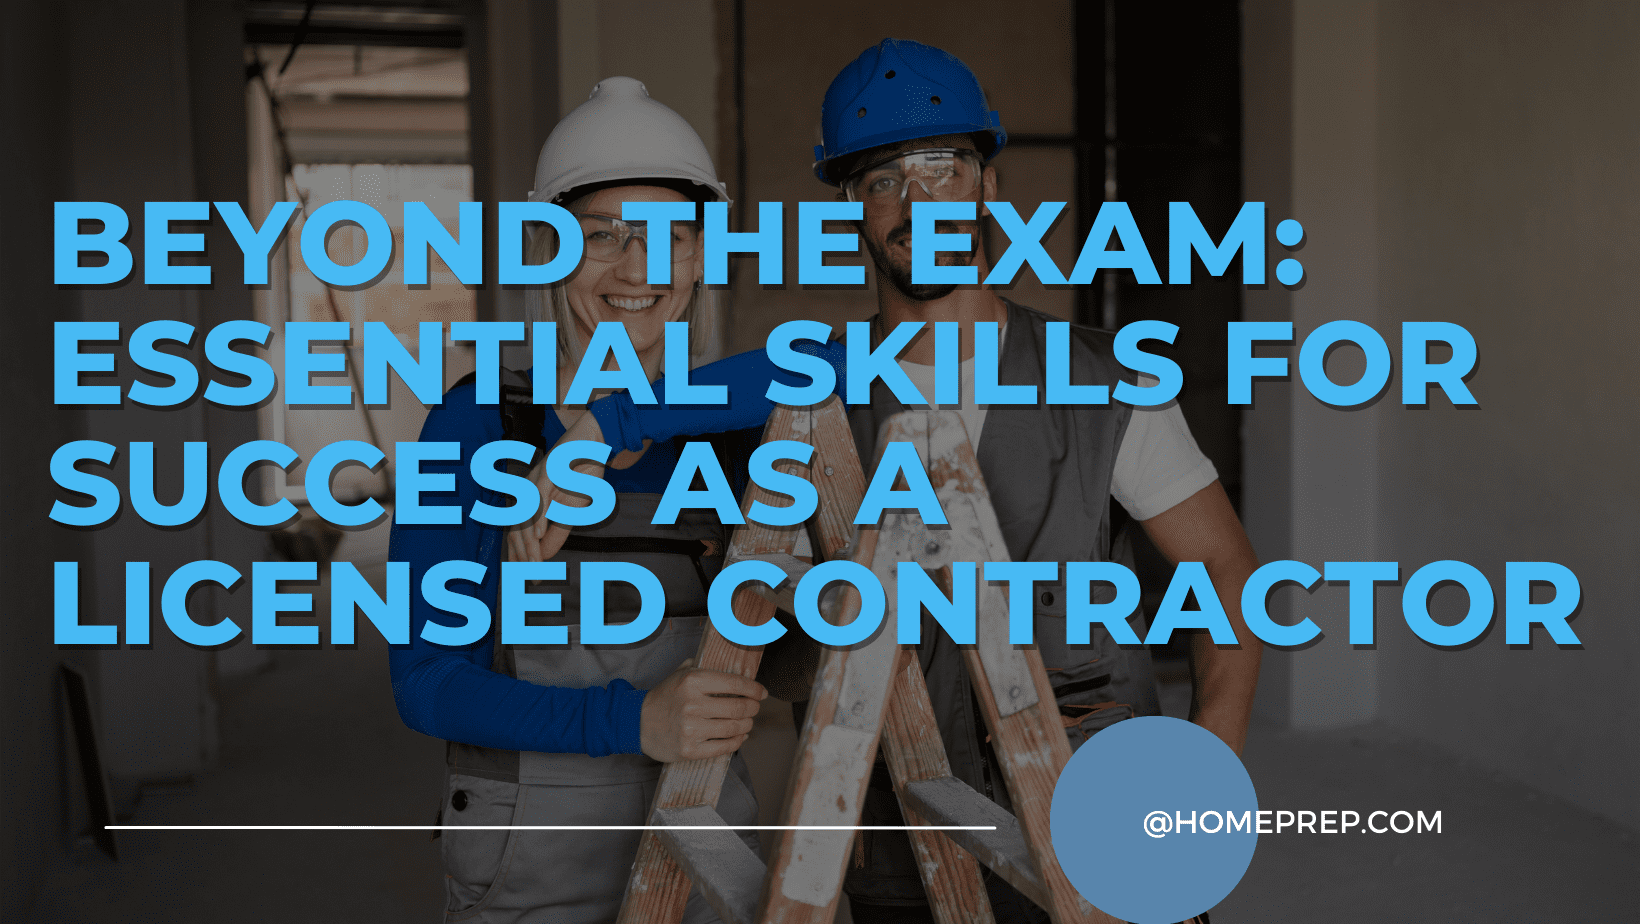 Beyond the Exam: Essential Skills for Success as a Licensed Contractor